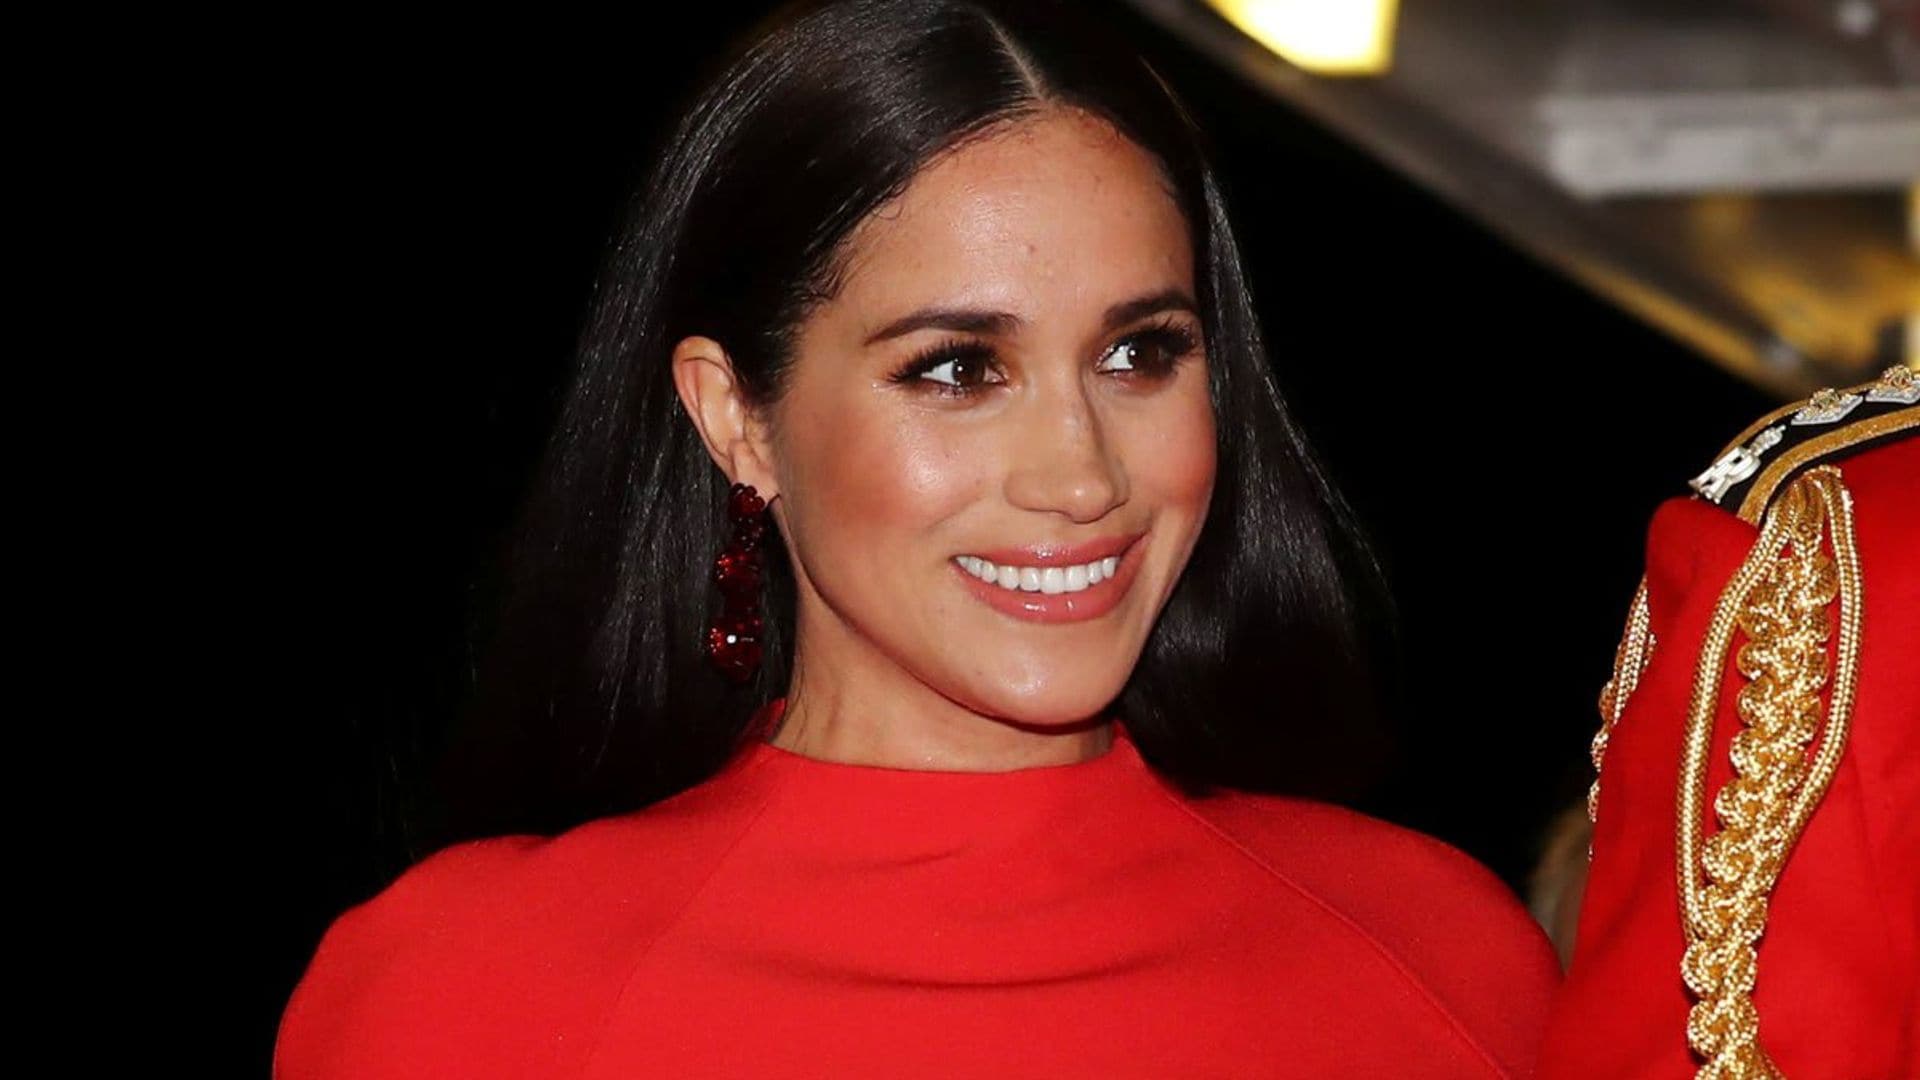 Meghan Markle teams up with Netflix to create new animated series